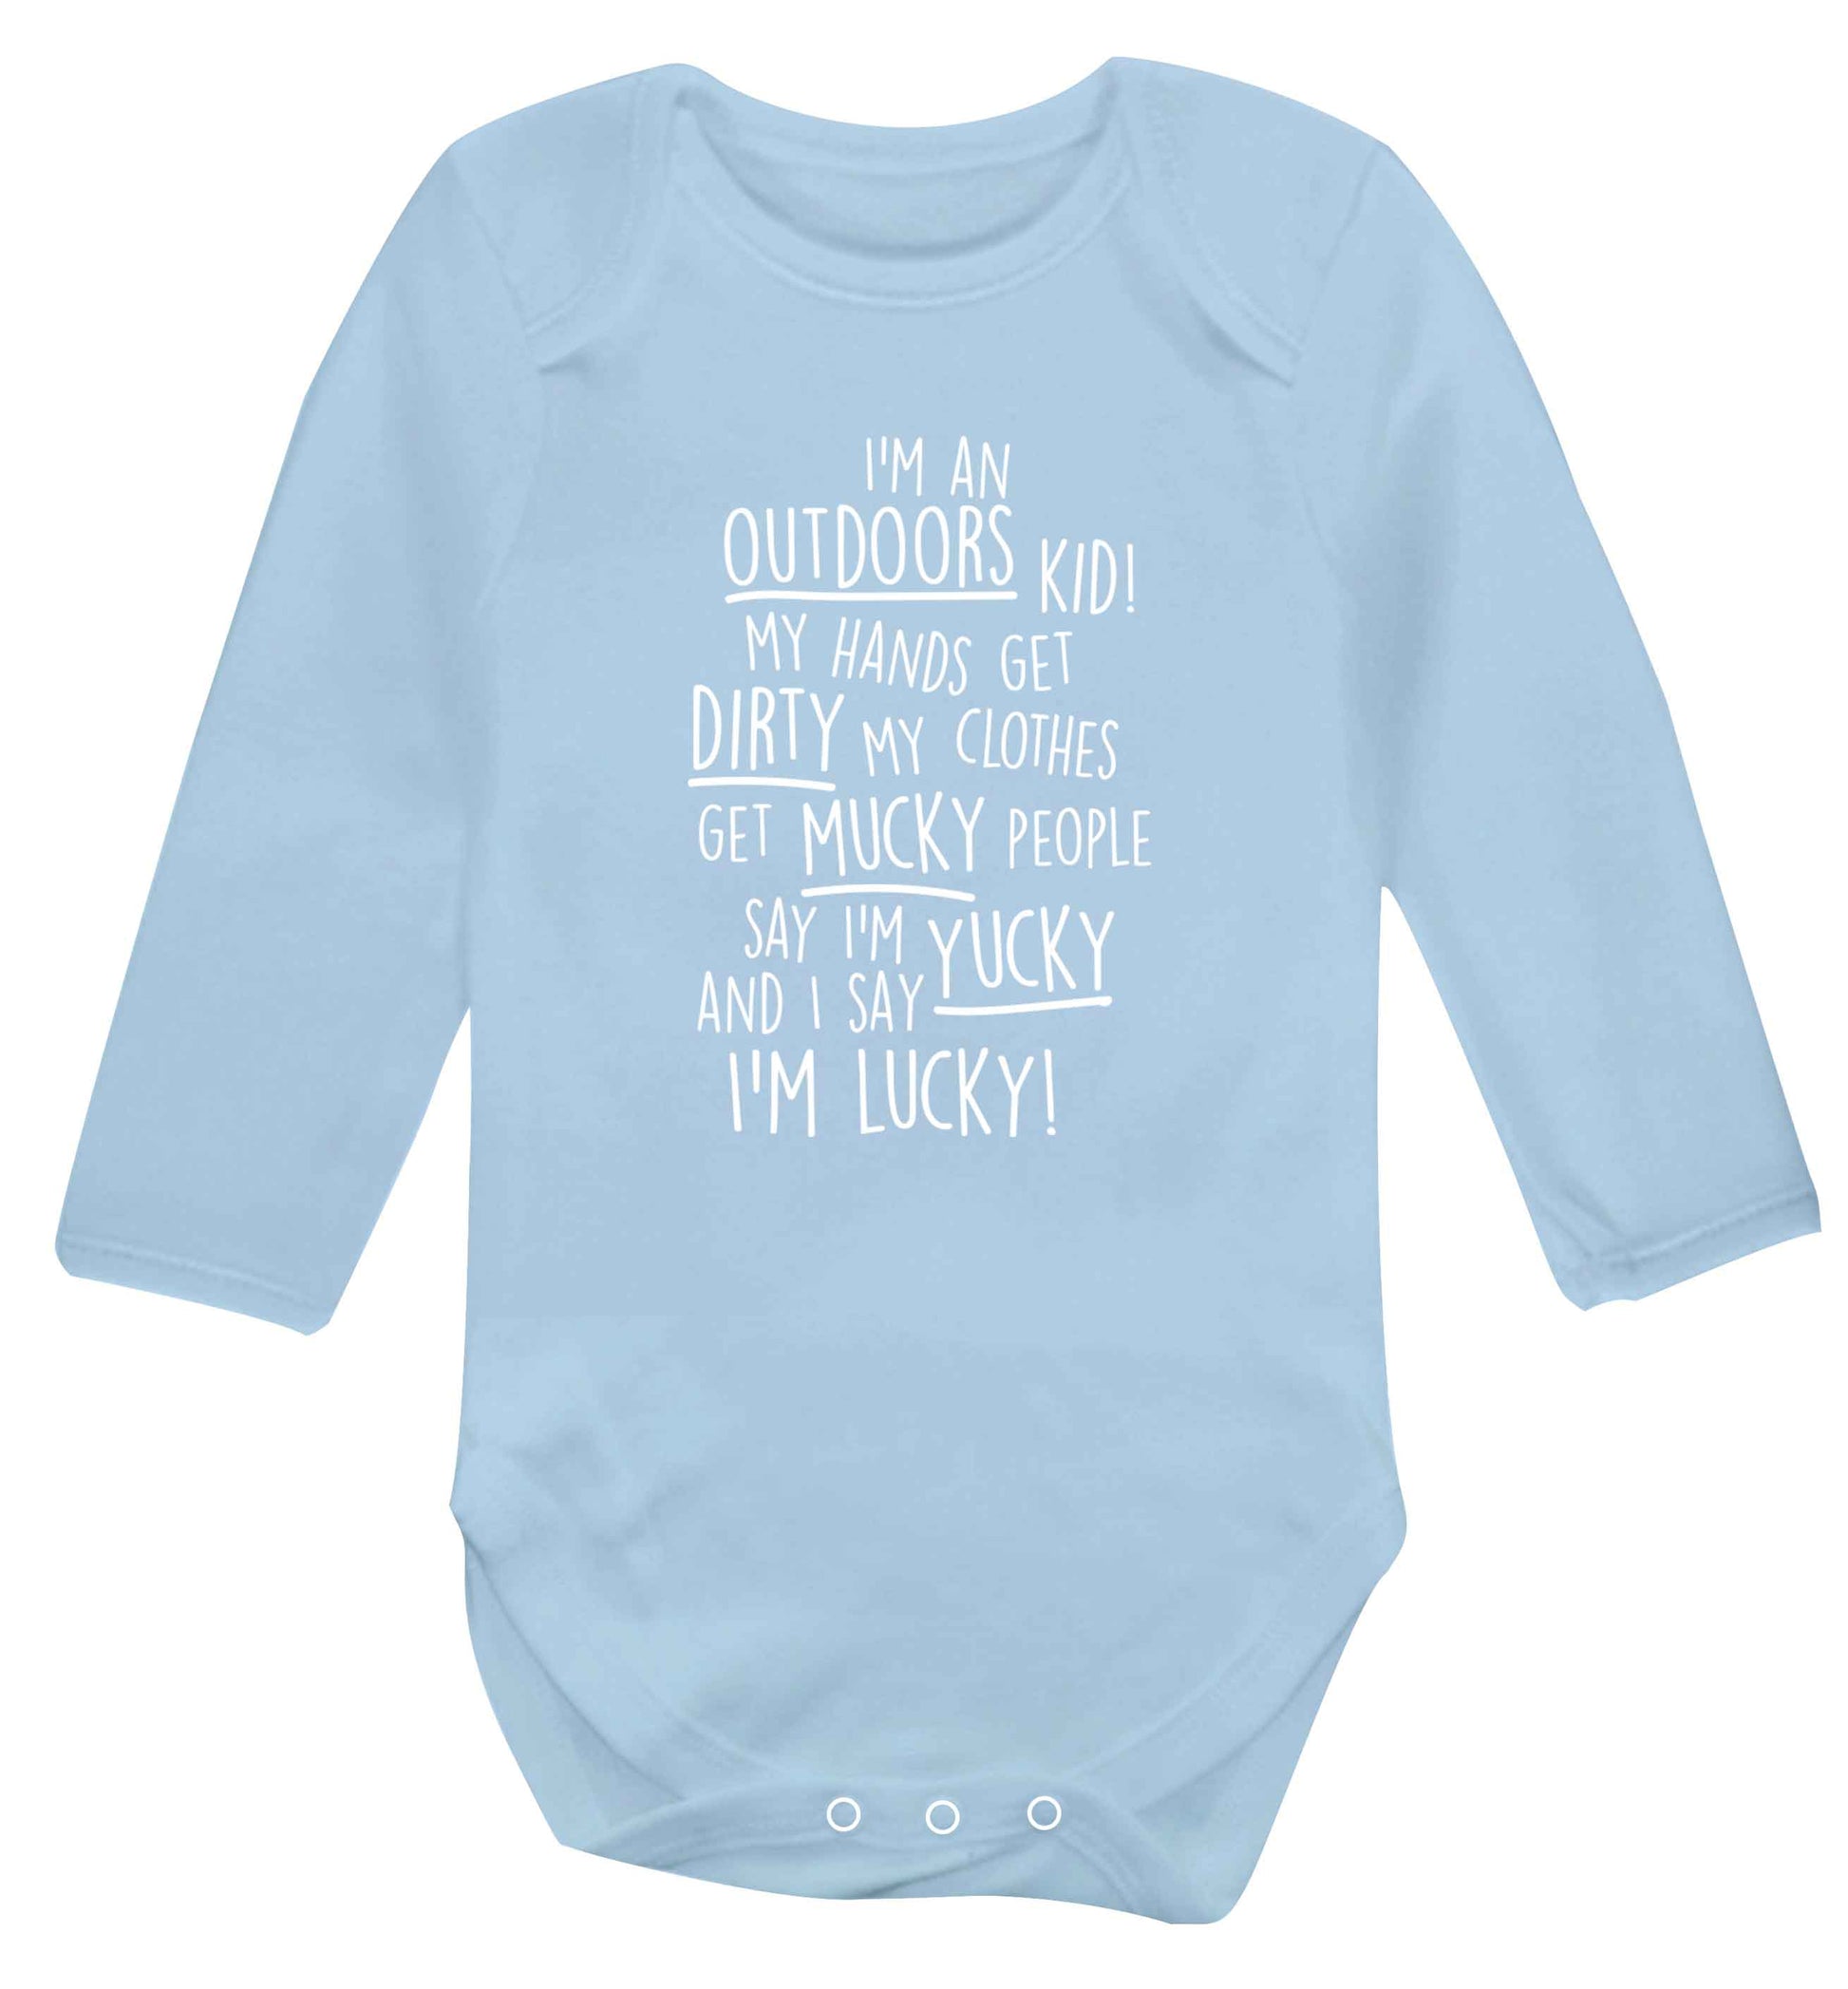 I'm an outdoors kid poem Baby Vest long sleeved pale blue 6-12 months